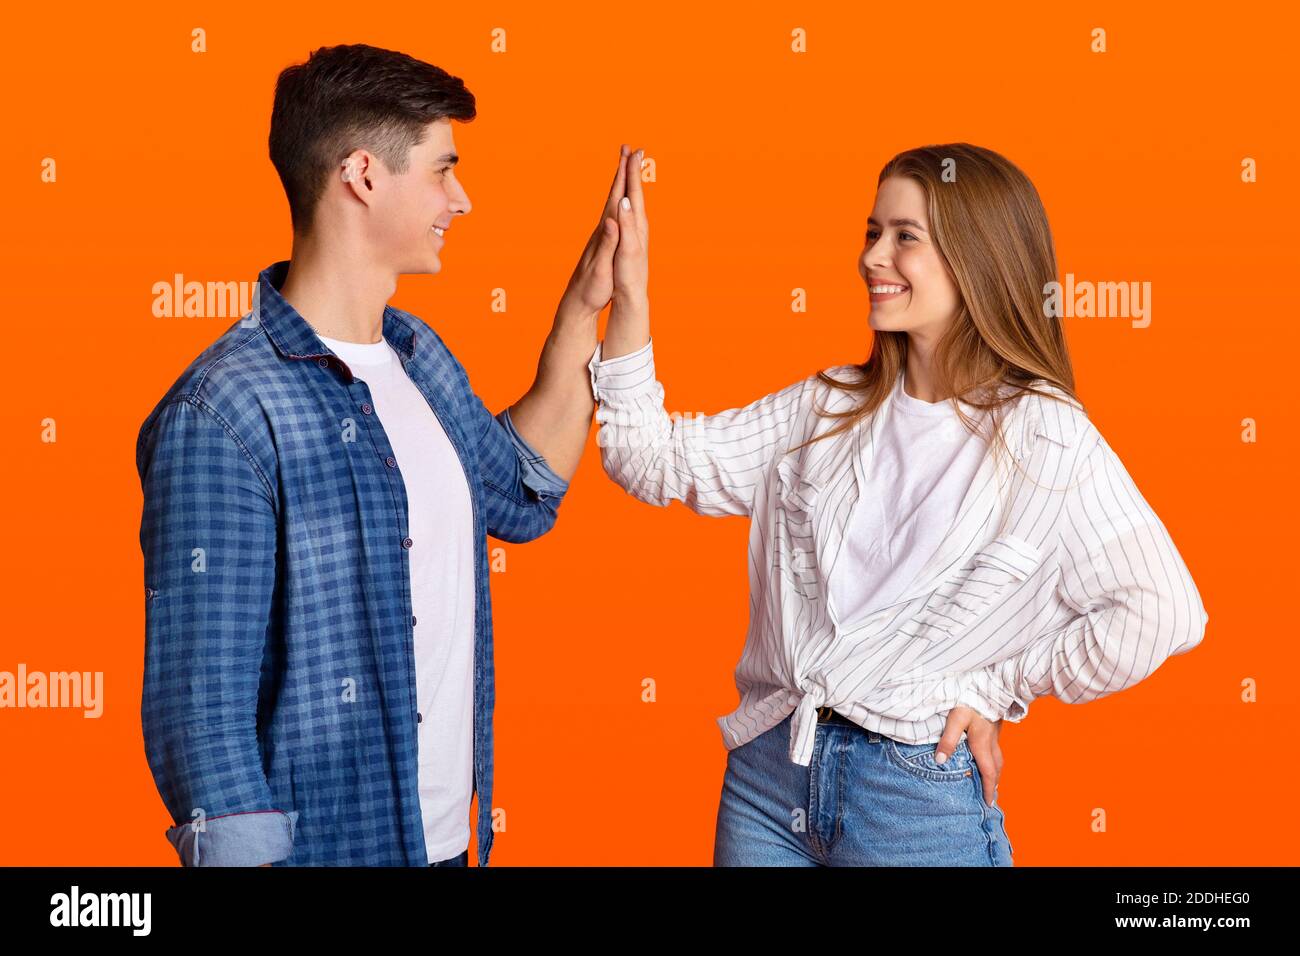 Give a high five and express sincere joy of victory during covid-19 Stock Photo